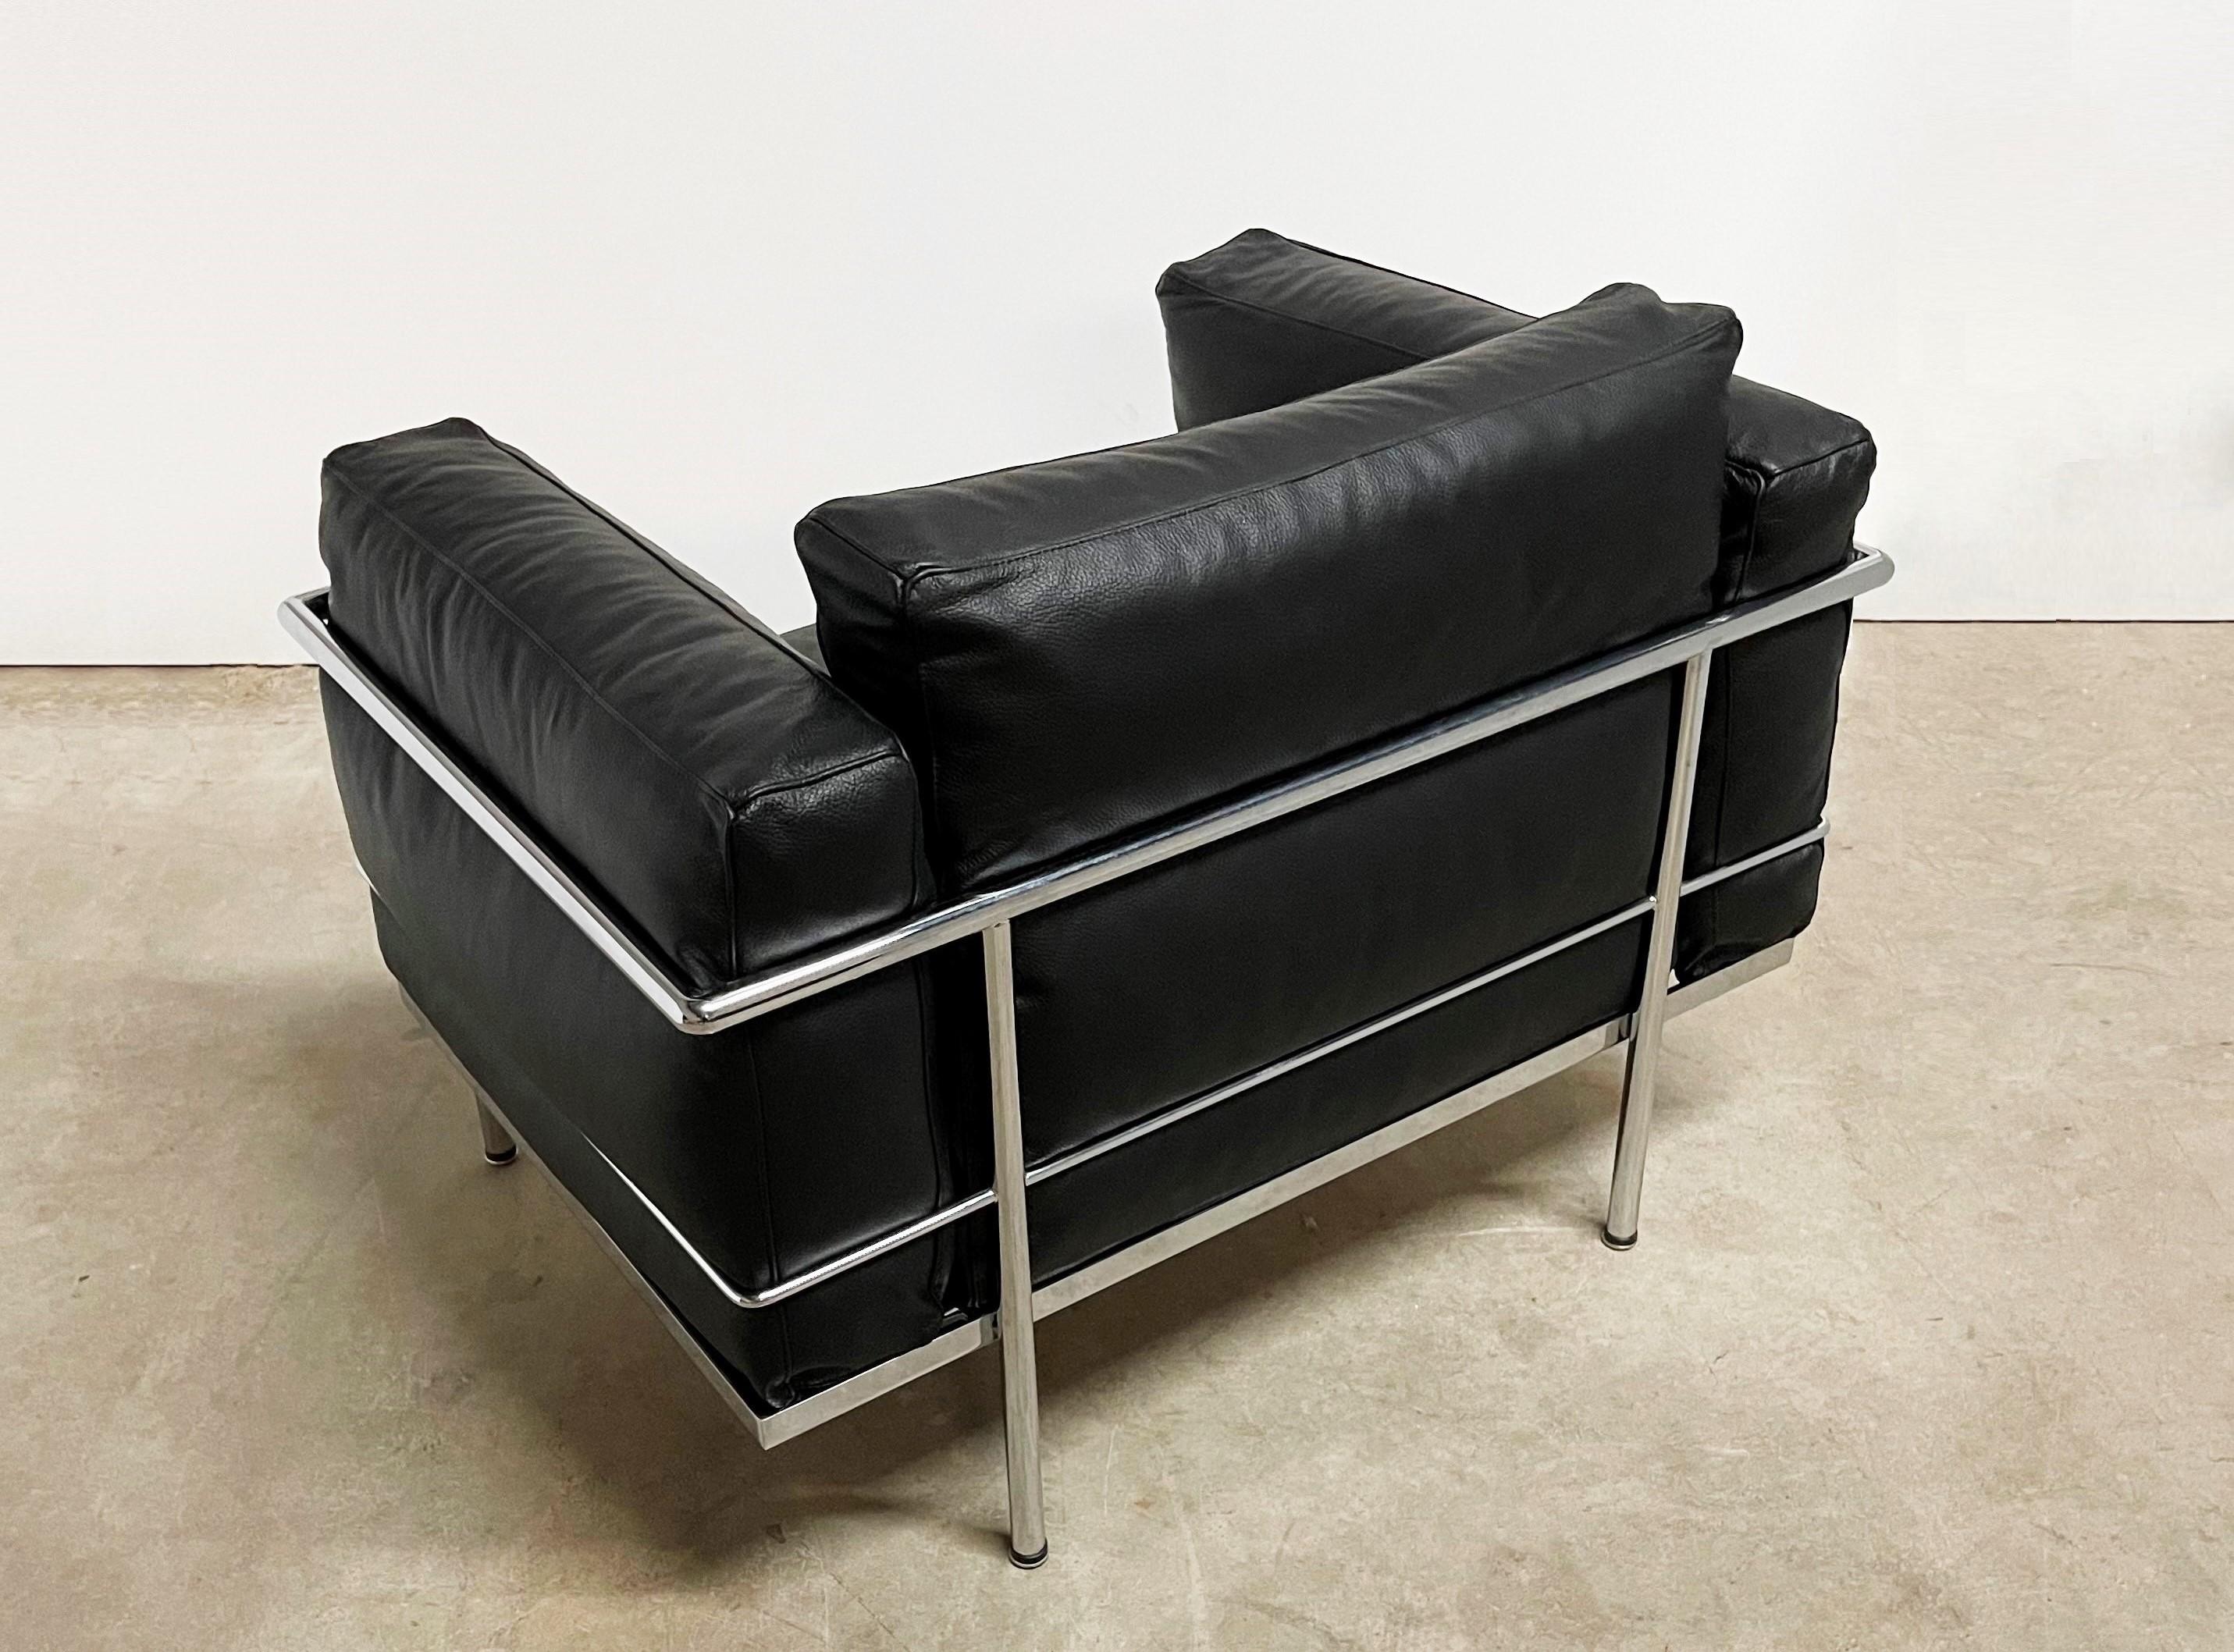 Pierre Jeanneret, Charlotte Perriand & Le Corbusier Grand Comfort Loungesessel im Angebot 3